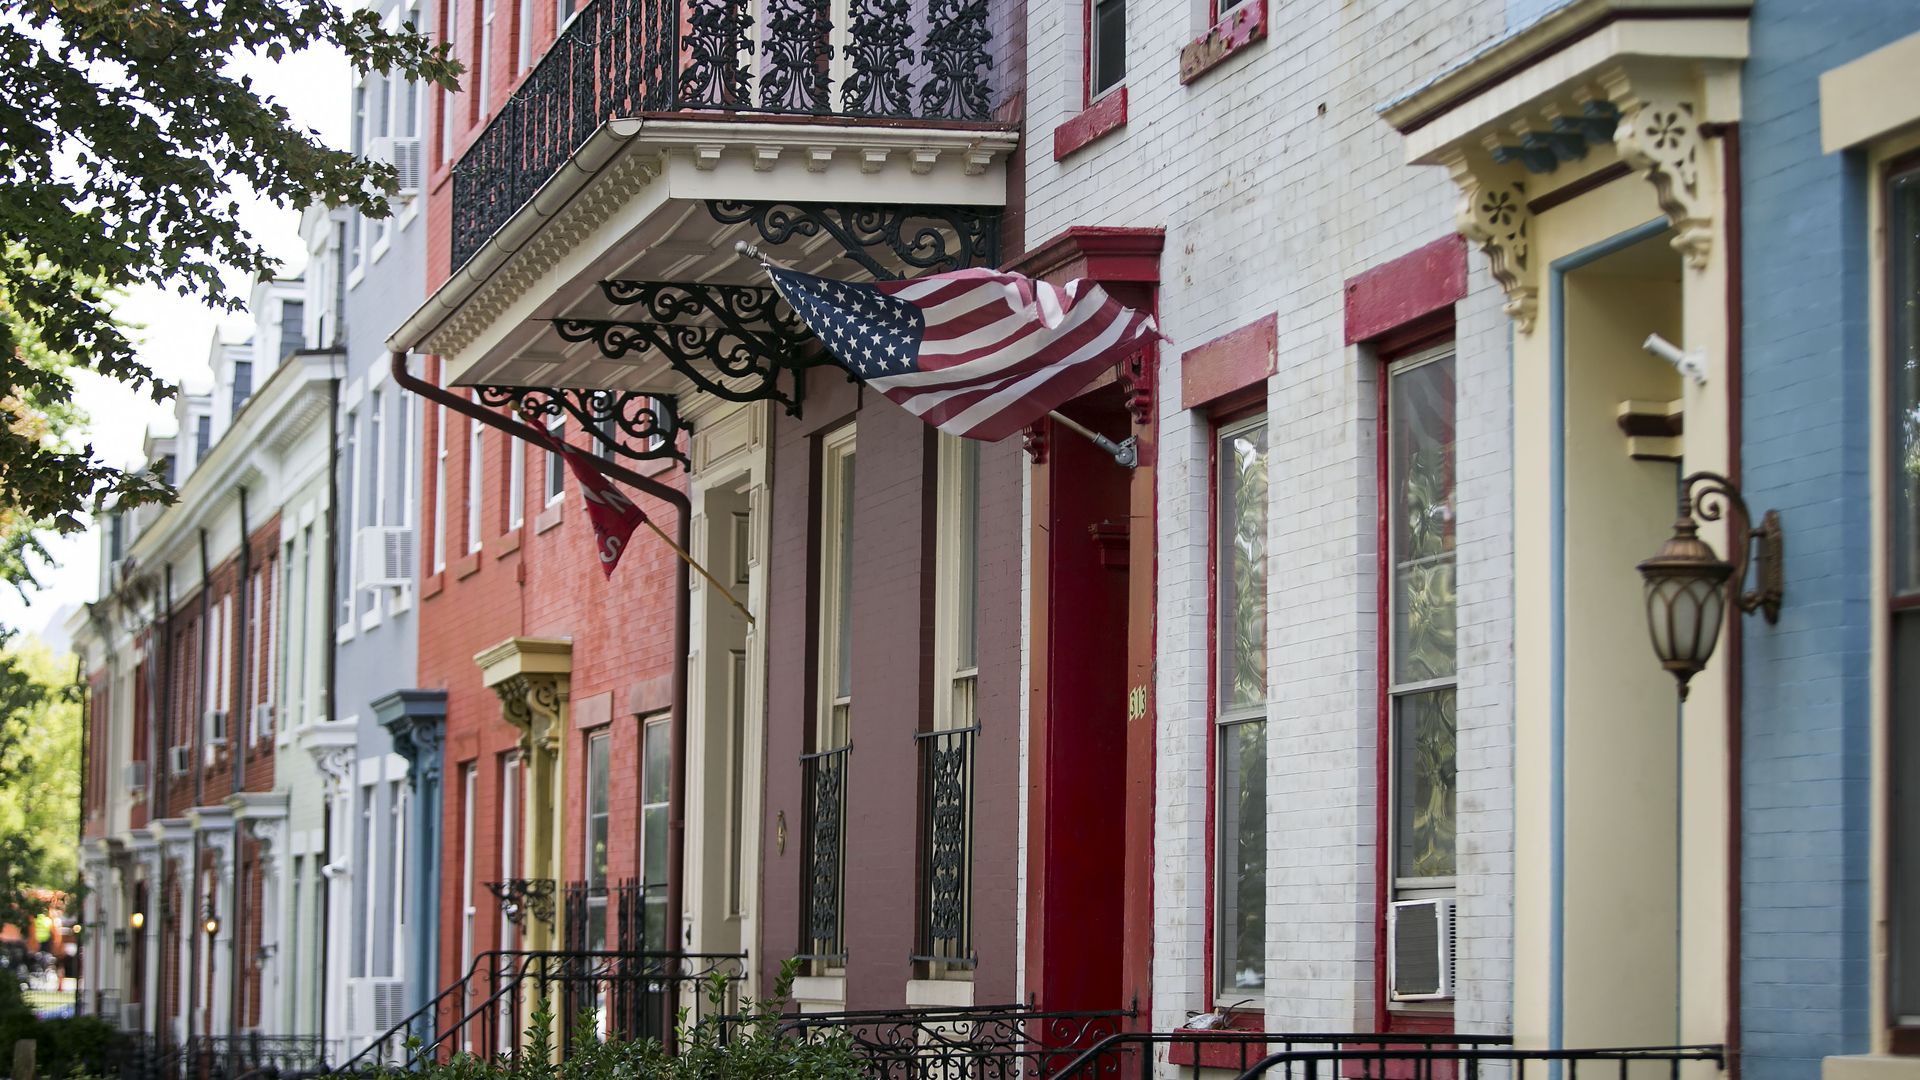 A colorful row of town homes and row homes in D.C.